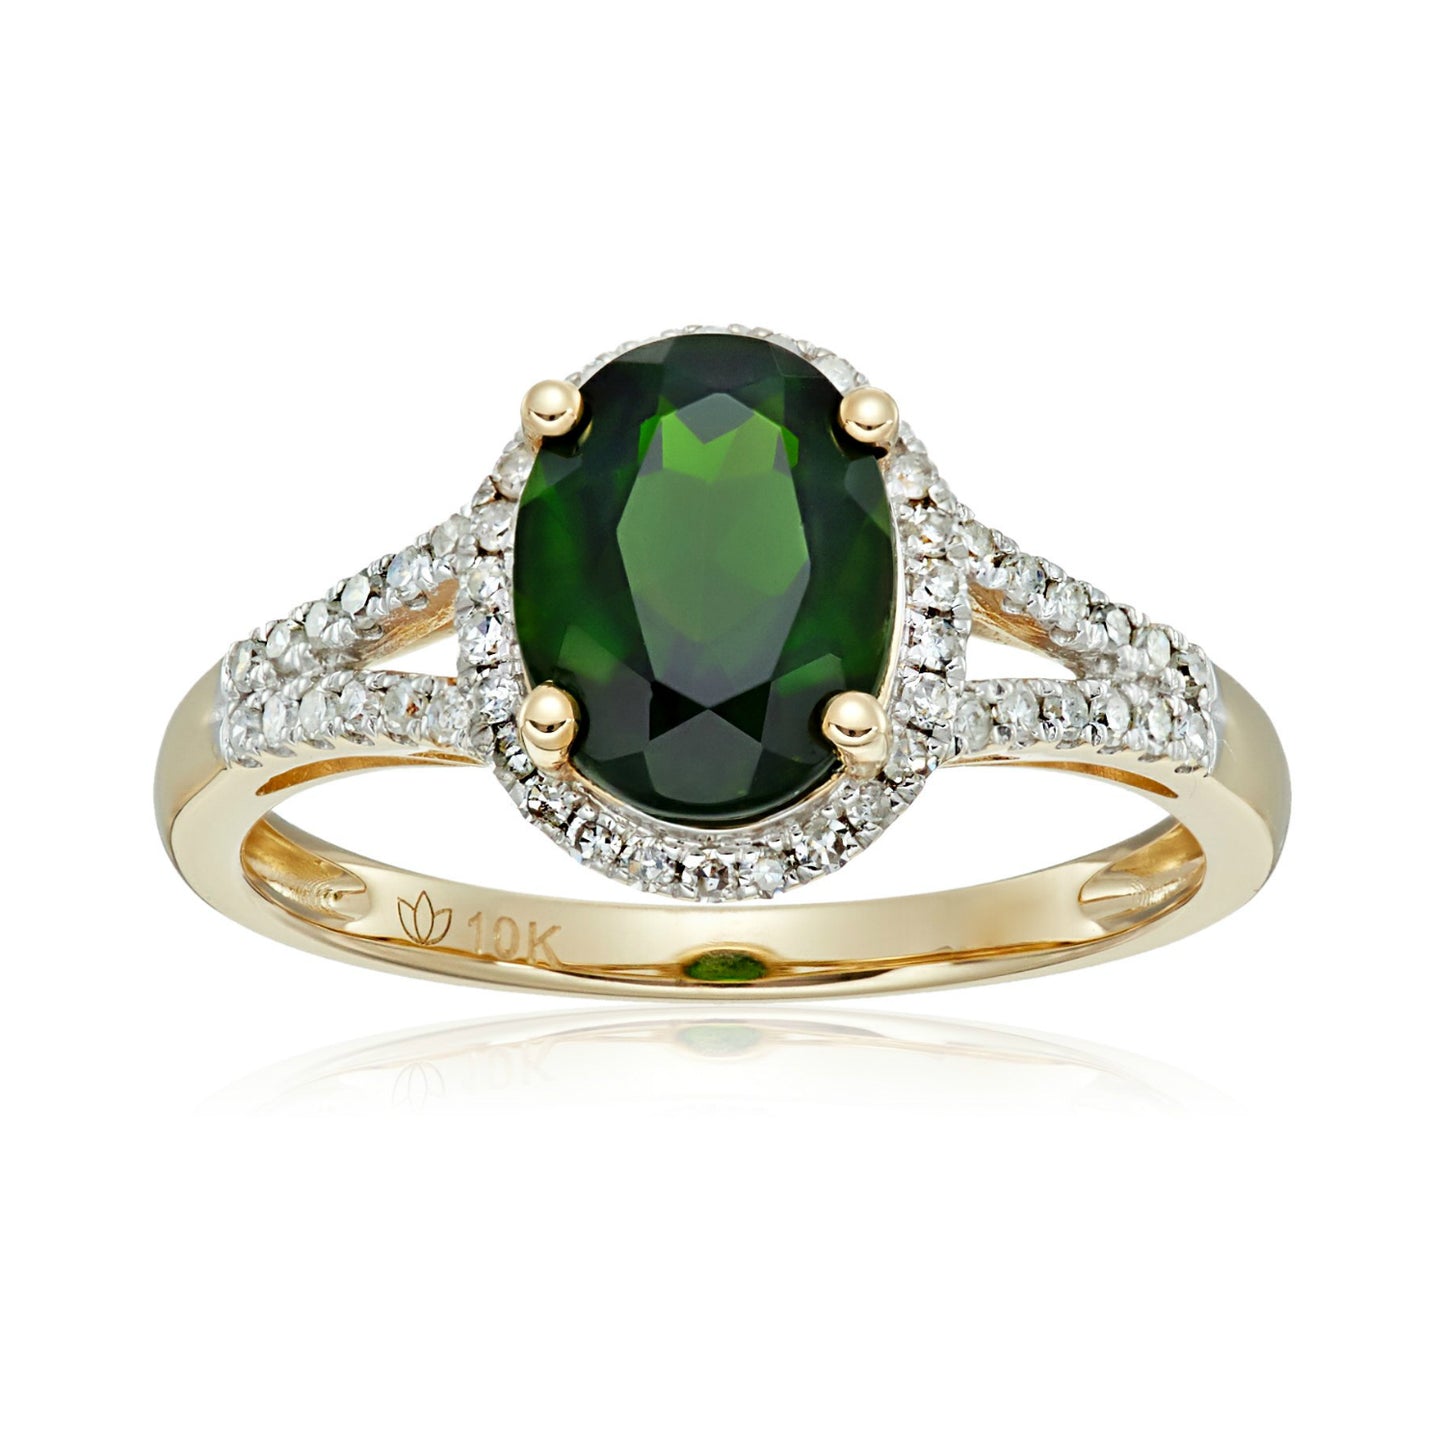 10k Yellow Gold Chrome Diopside and Diamond Oval Halo Engagement Ring (1/5cttw, H-I Color, I1-I2 Clarity), - pinctore